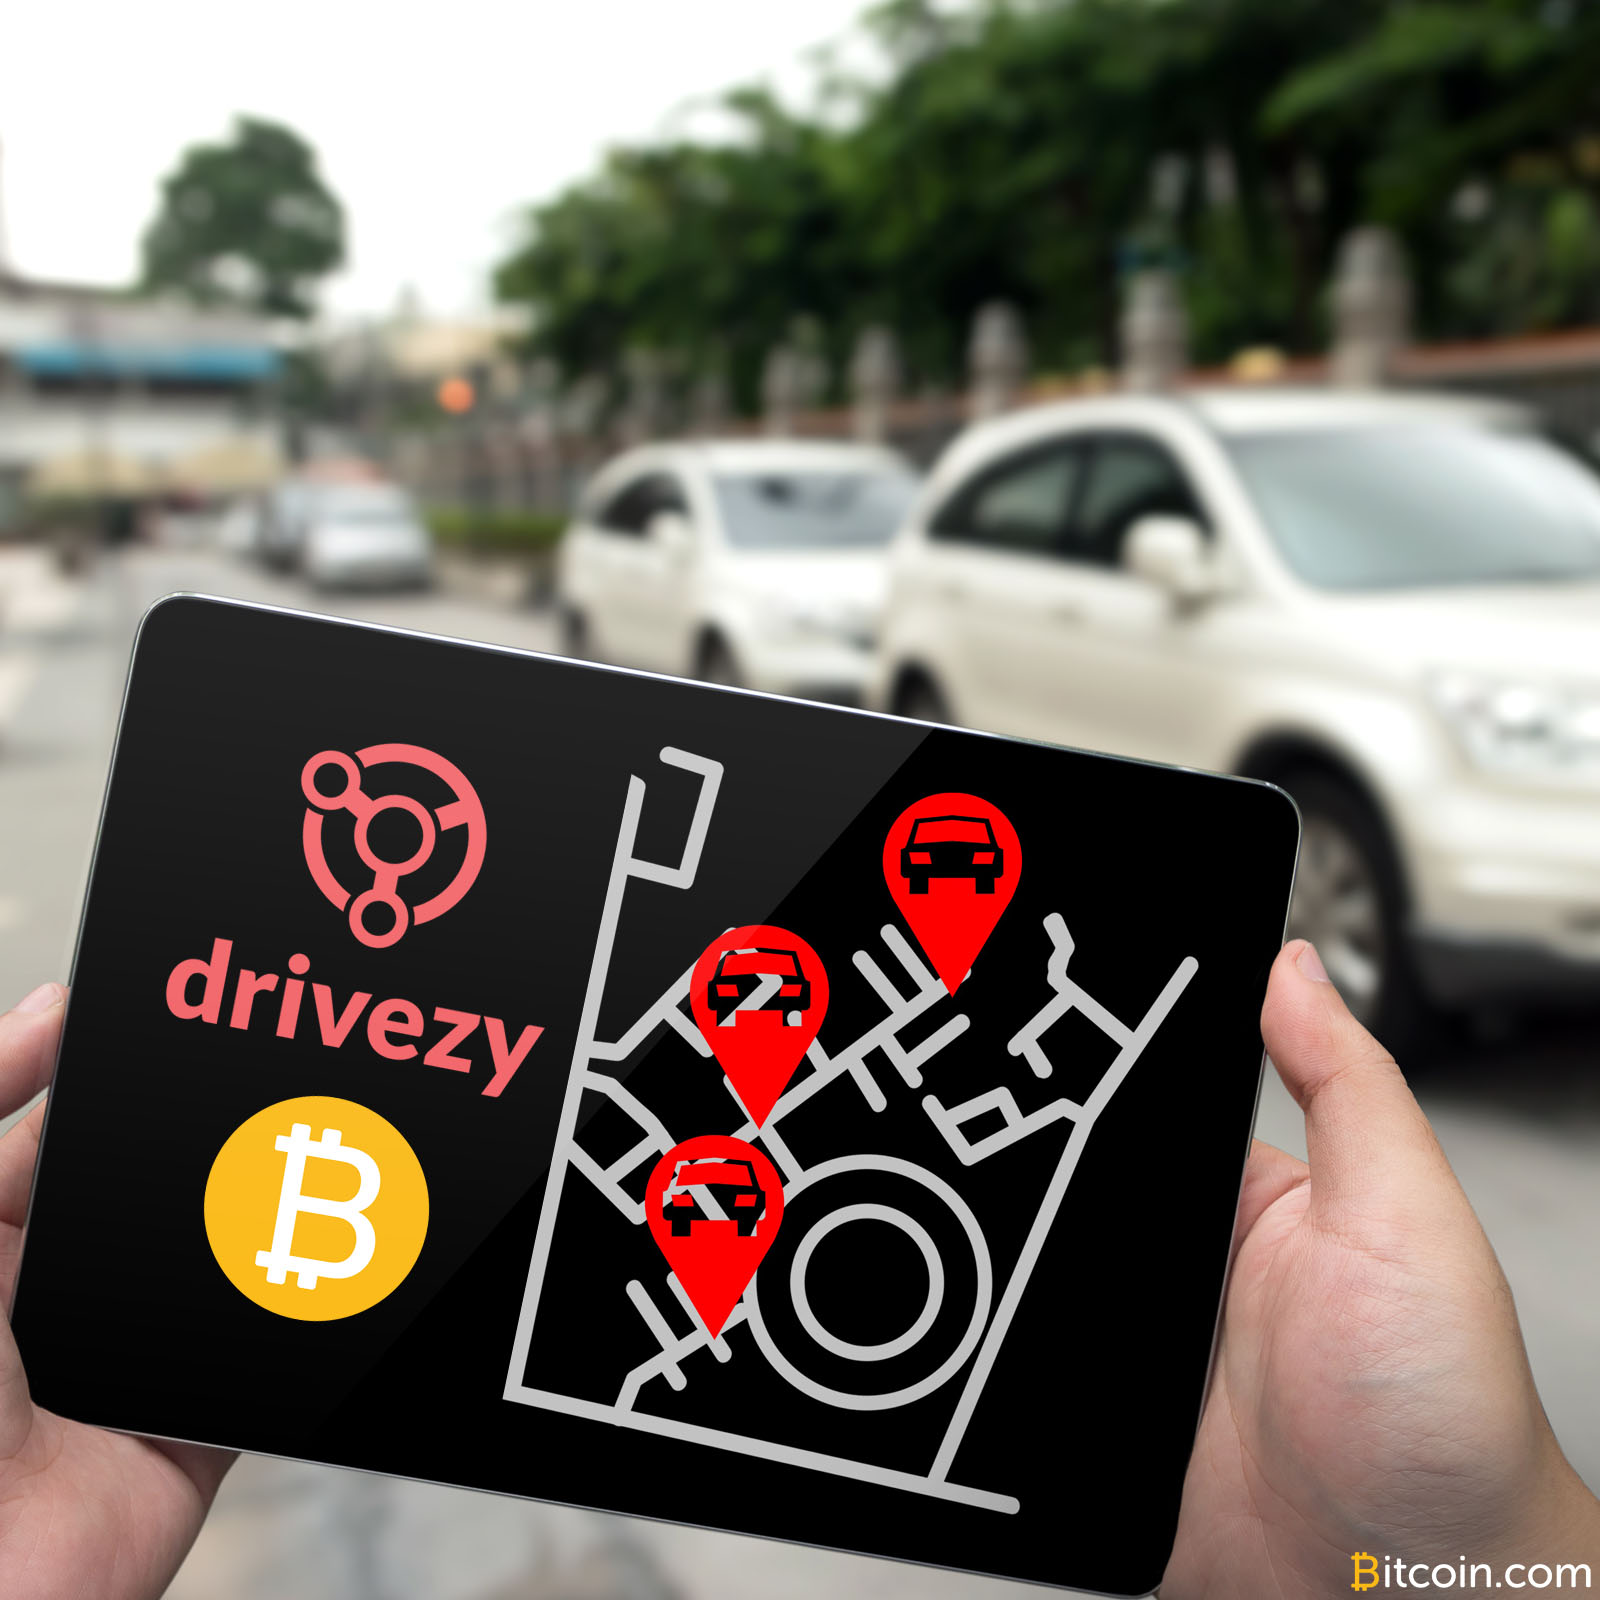 Car Sharing Firm Gets $10 Million, Adds Bitcoin Payments